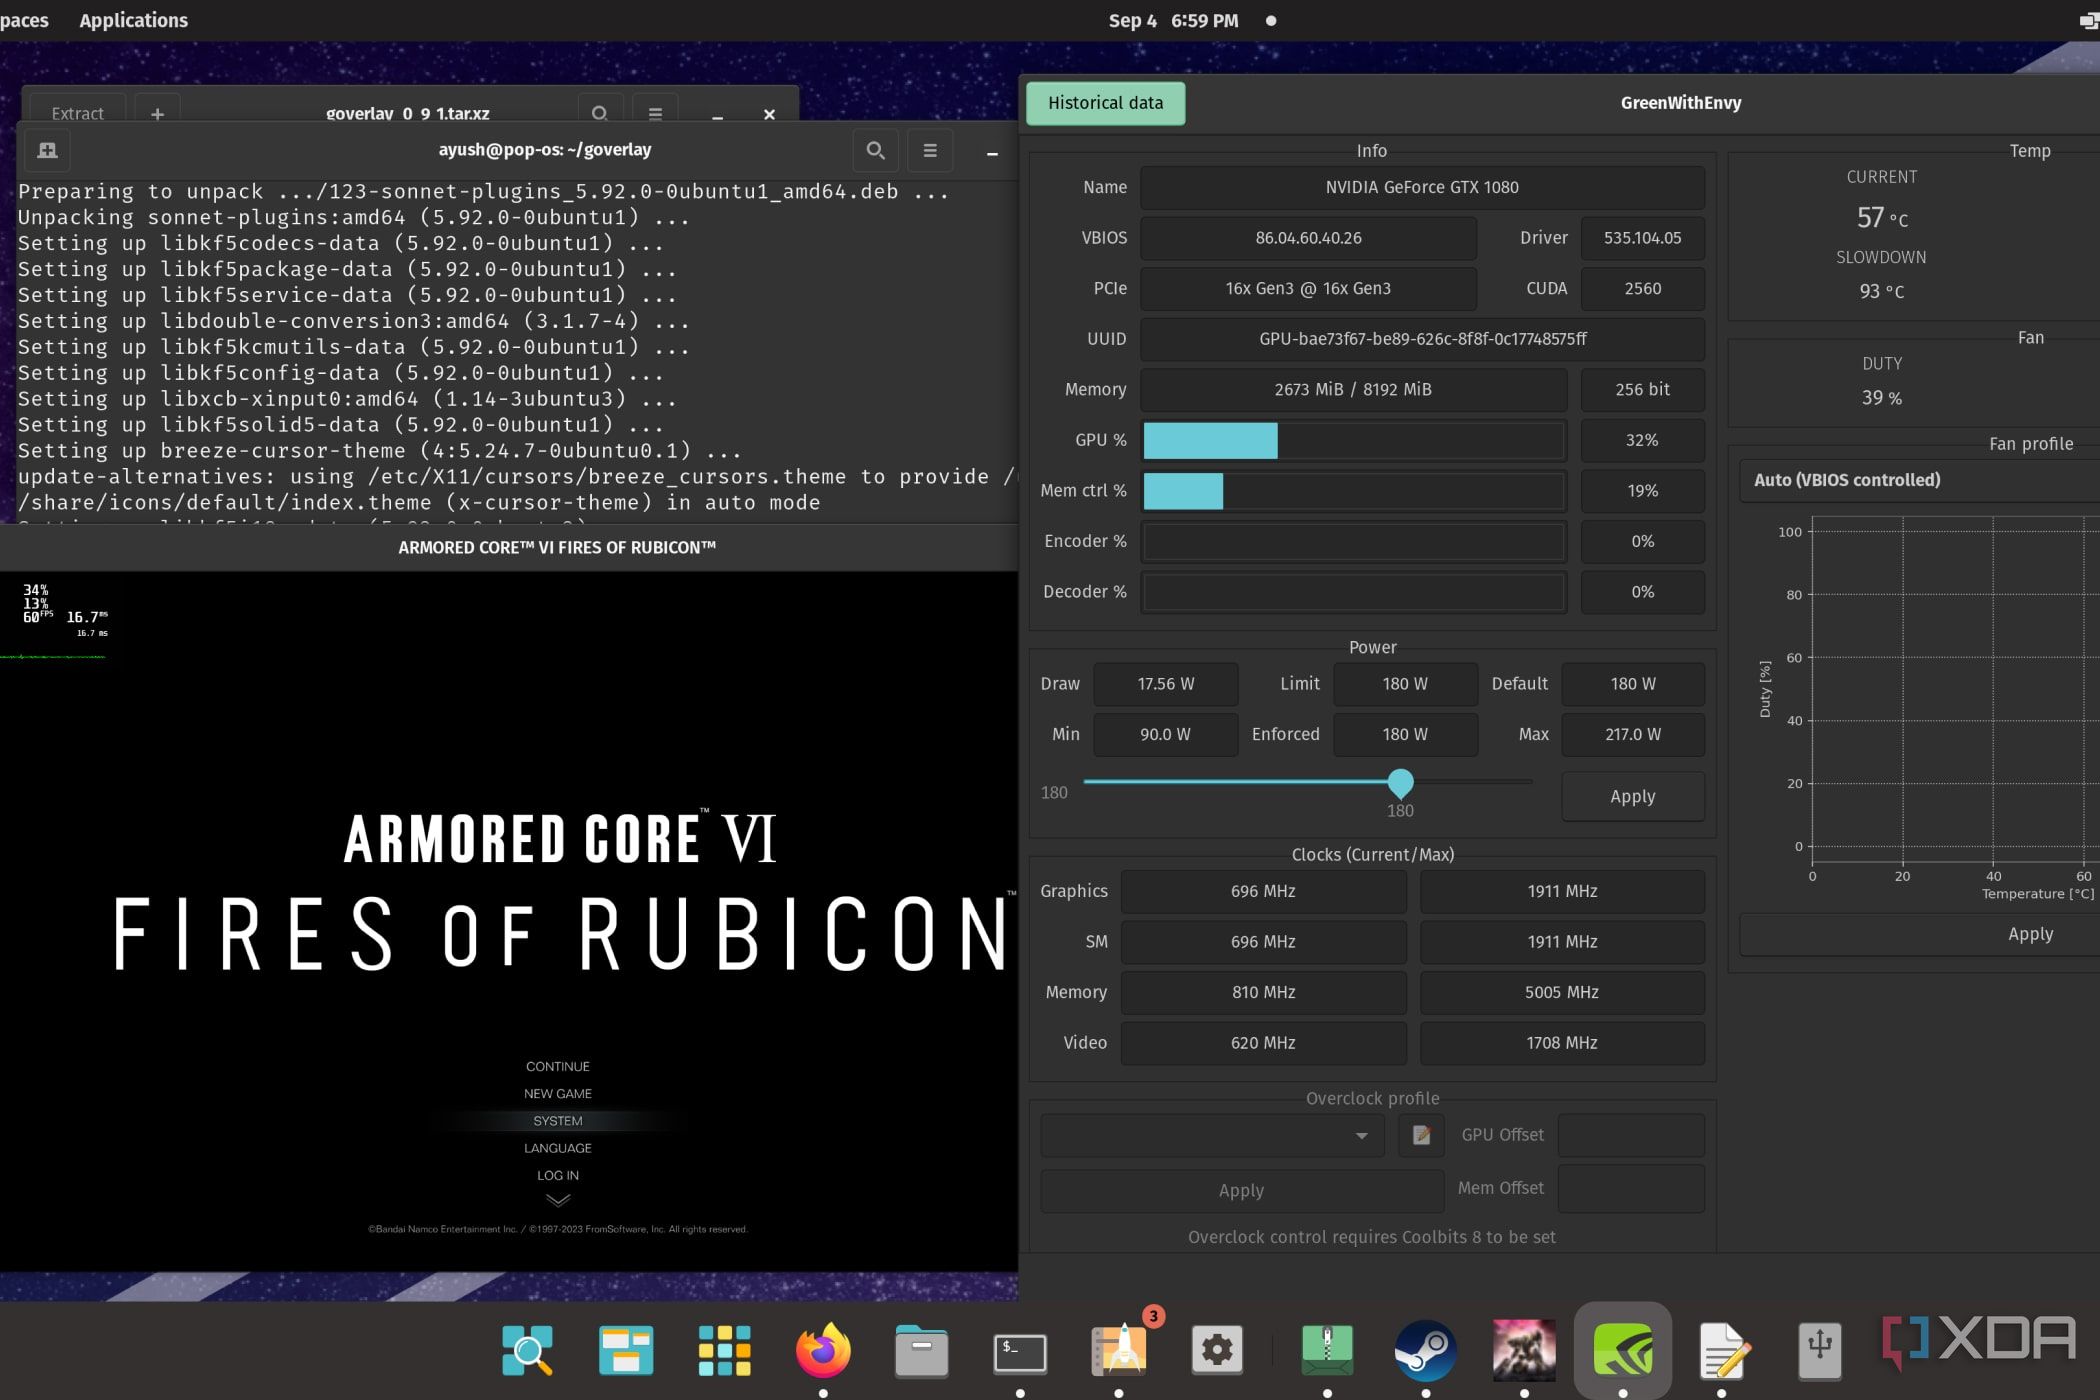 A screenshot depicting the various video game customization tools available on Pop!_OS